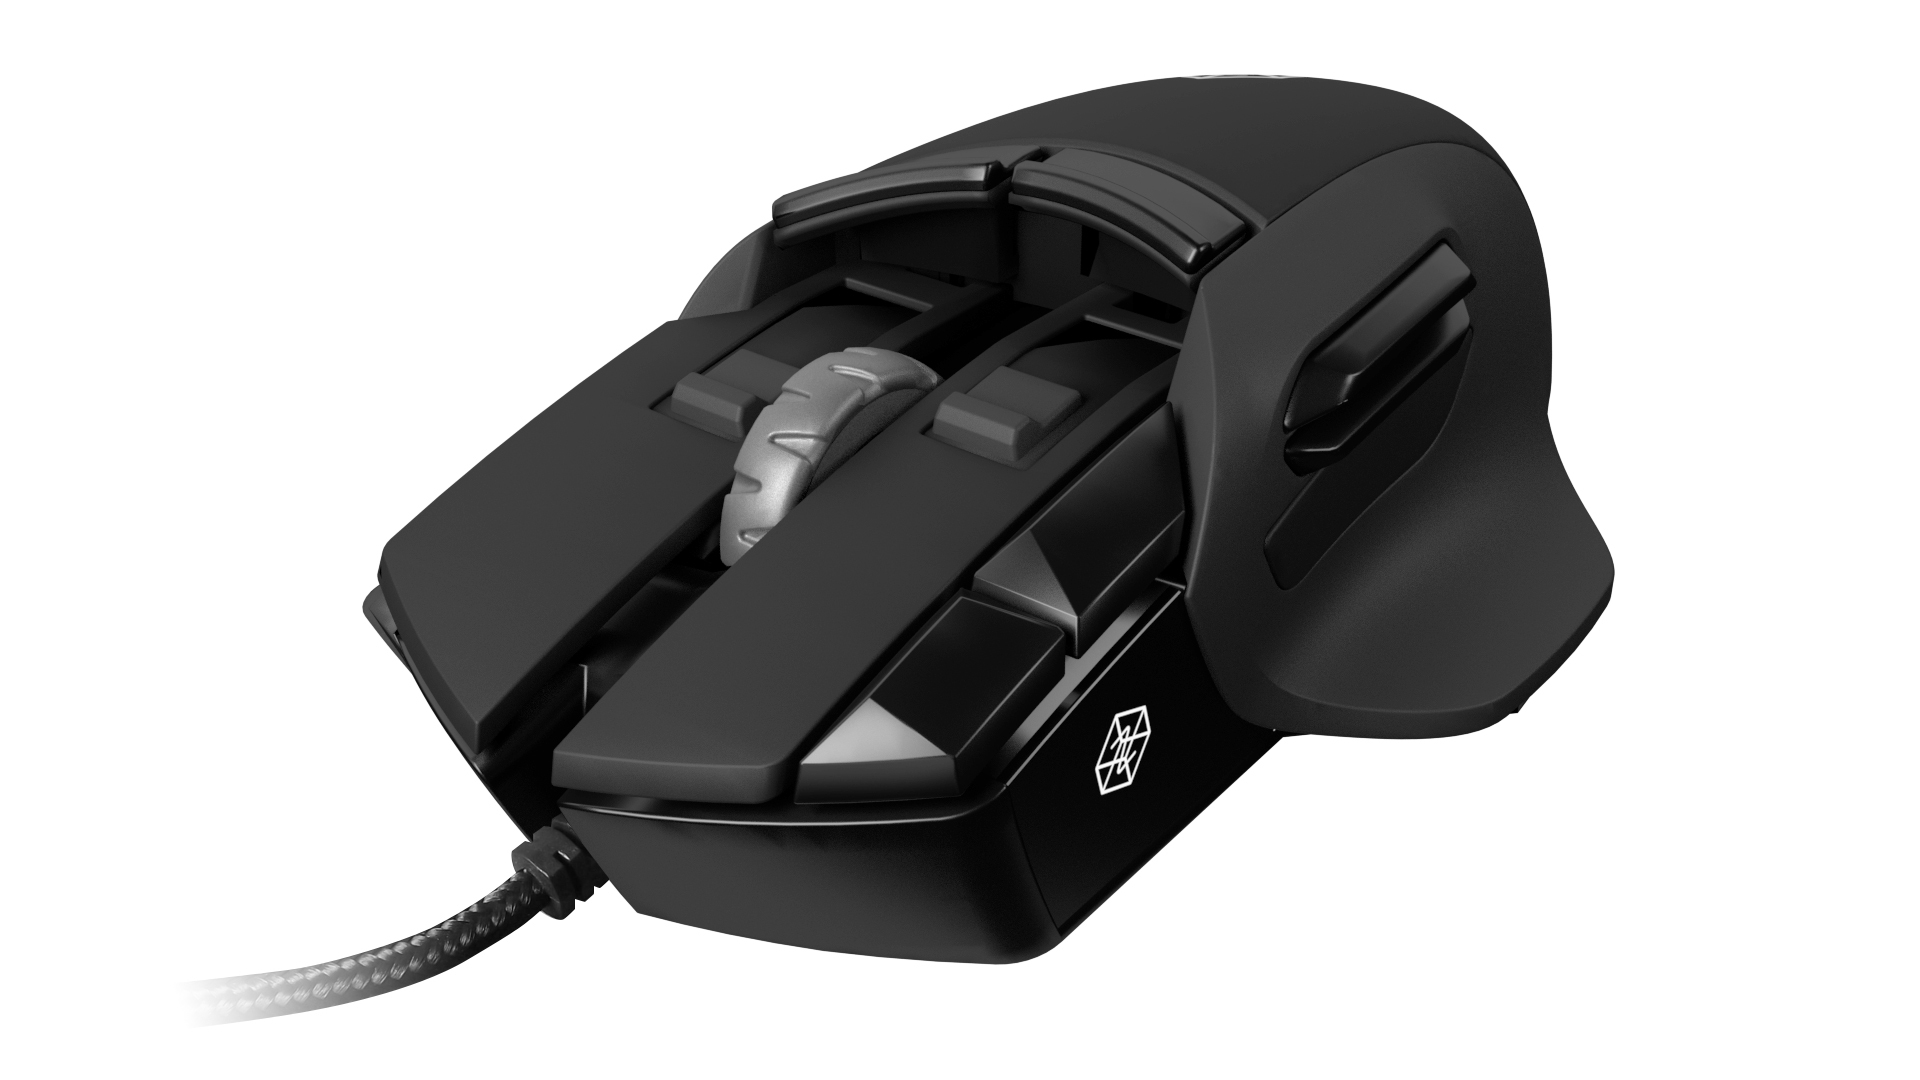 Swiftpoint Launches a High Performance Gaming and Desktop Mouse